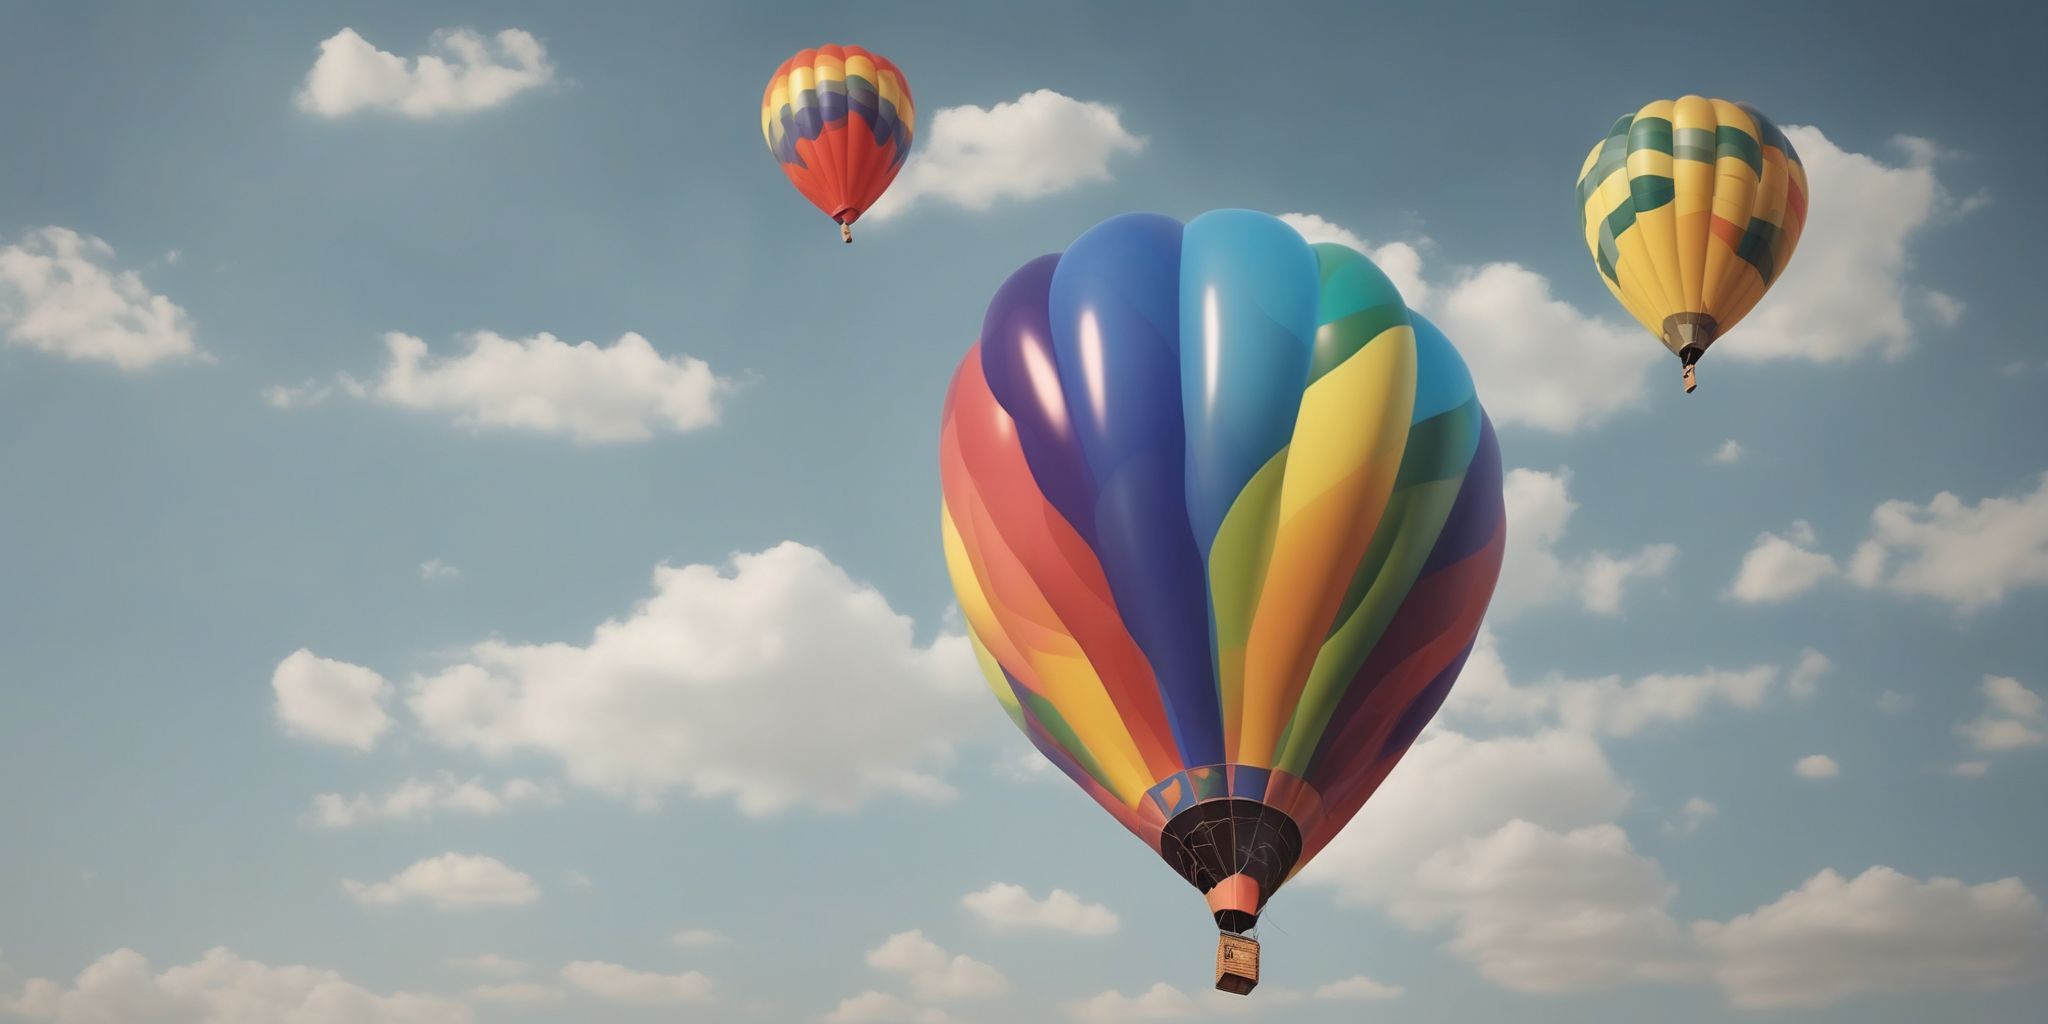 Balloon  in realistic, photographic style